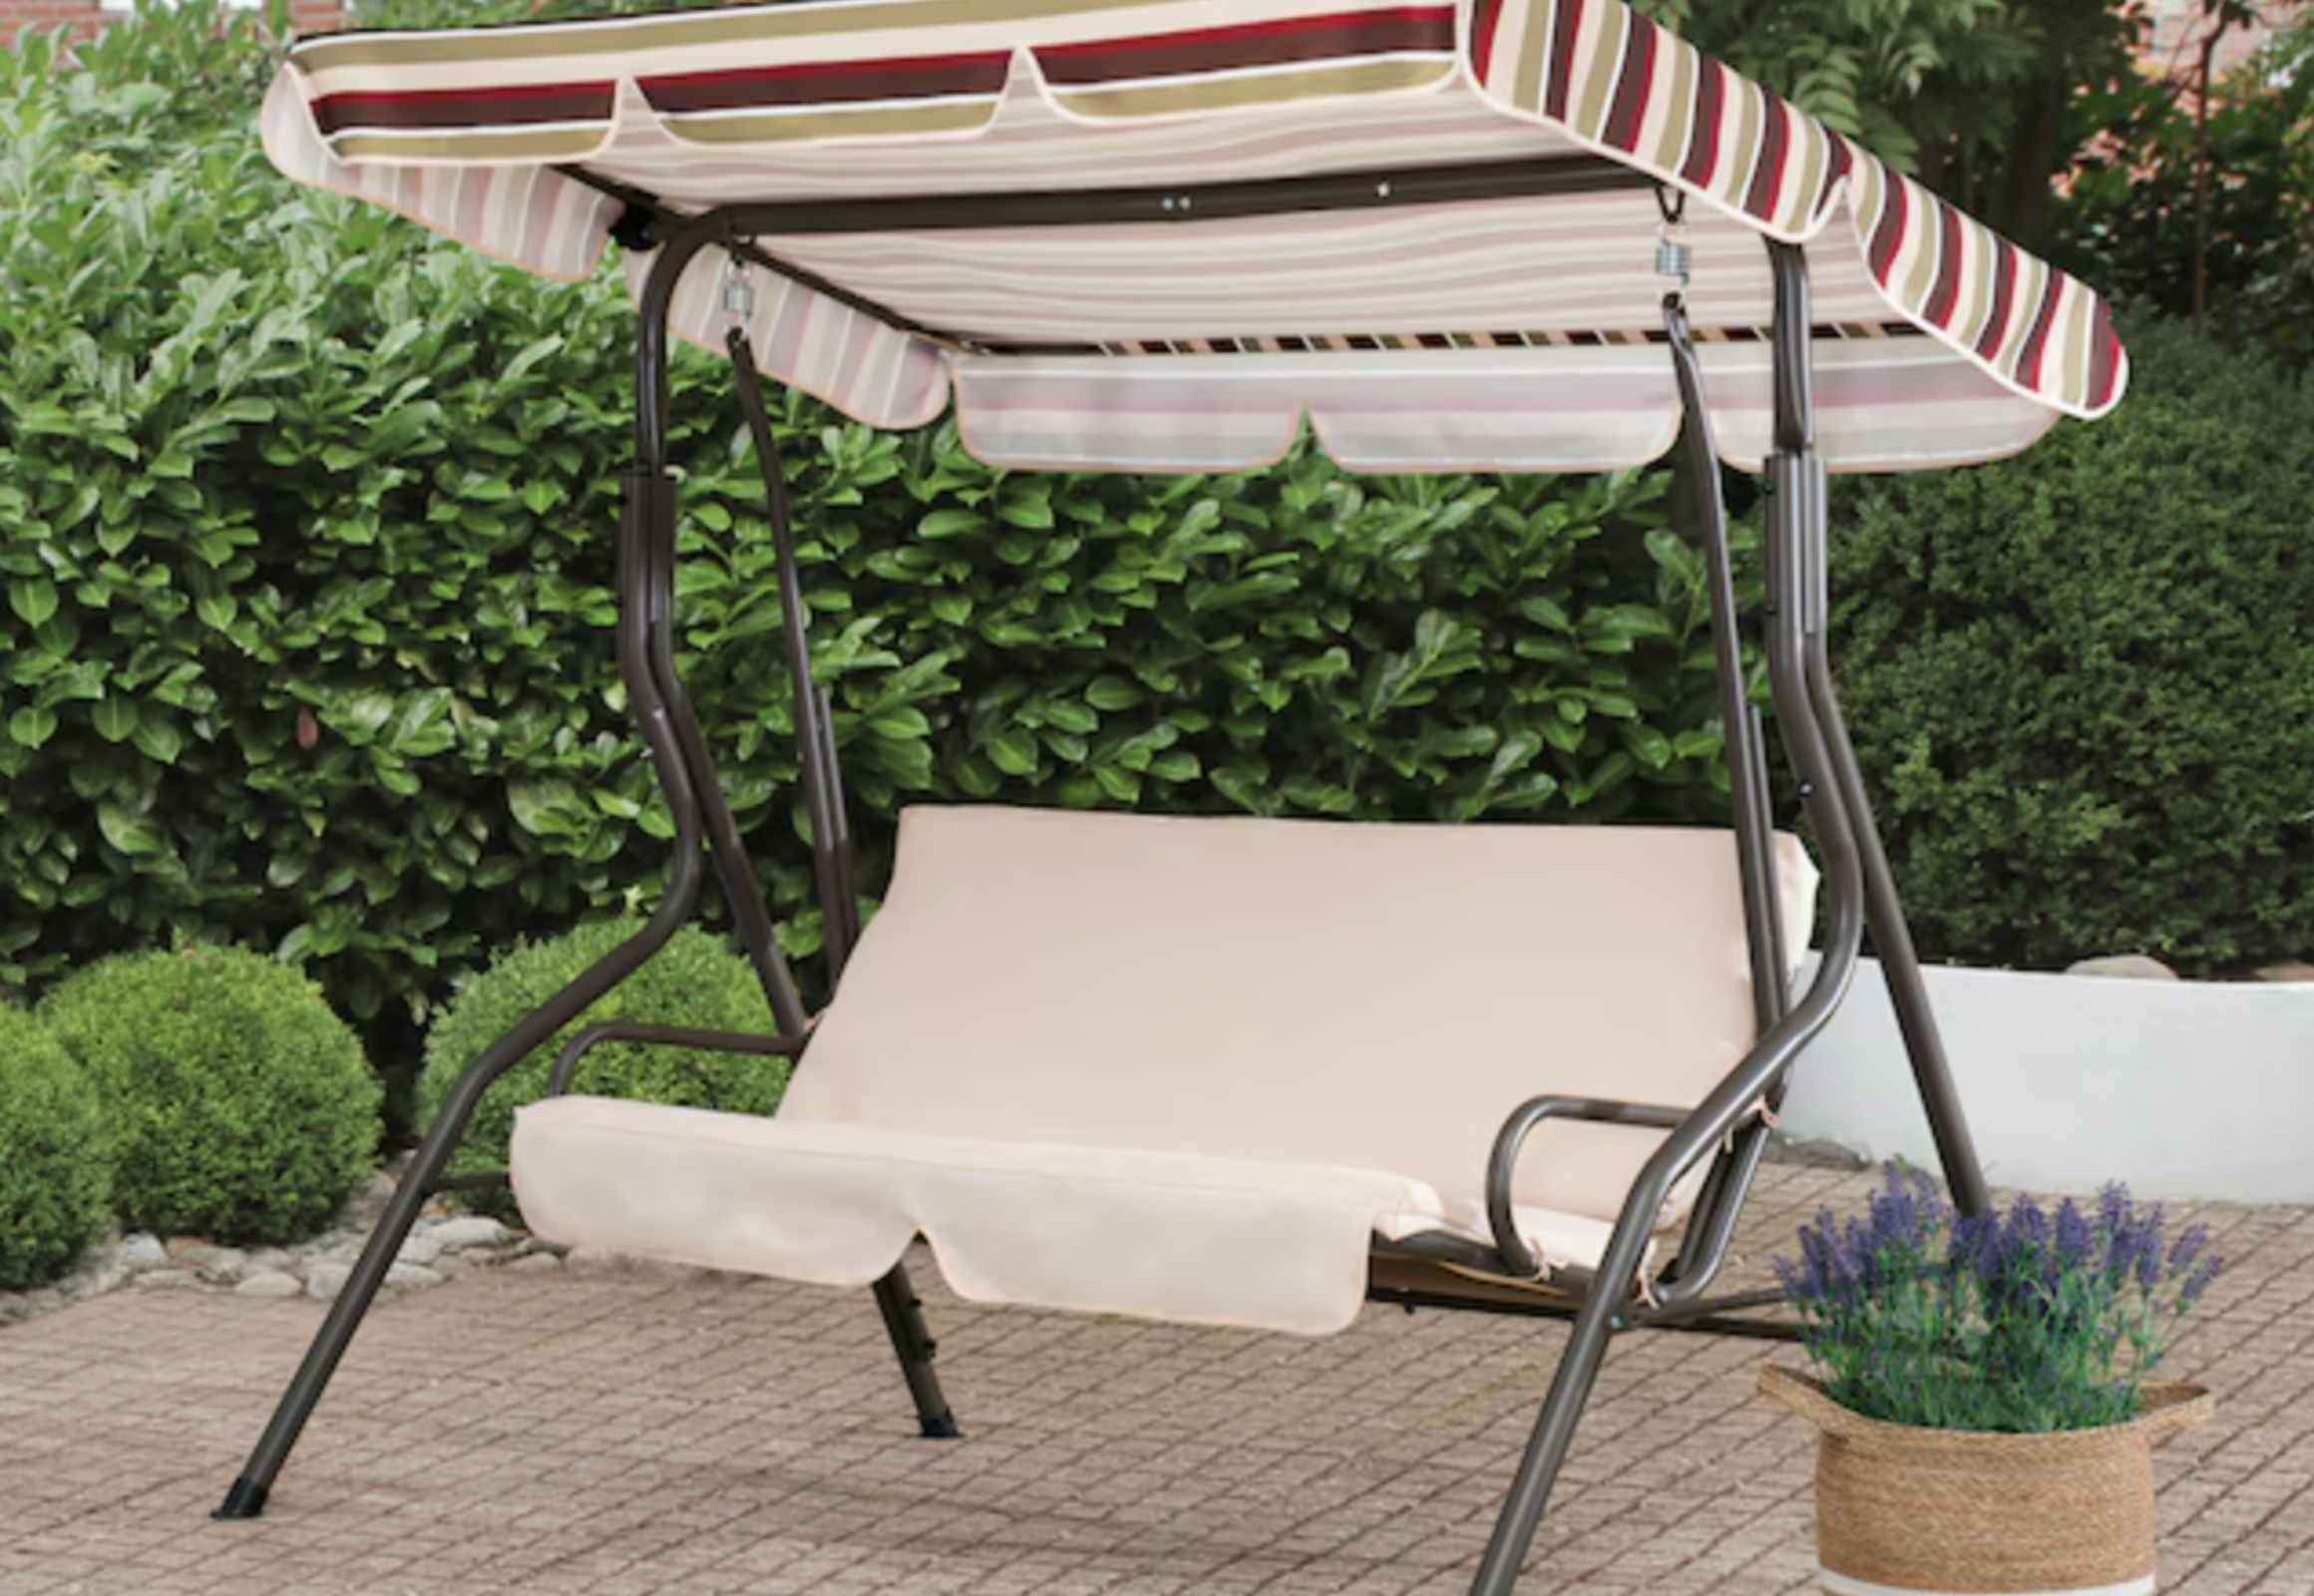 Loveseat Swing With Tilting Canopy, Only $67 at Lowe’s